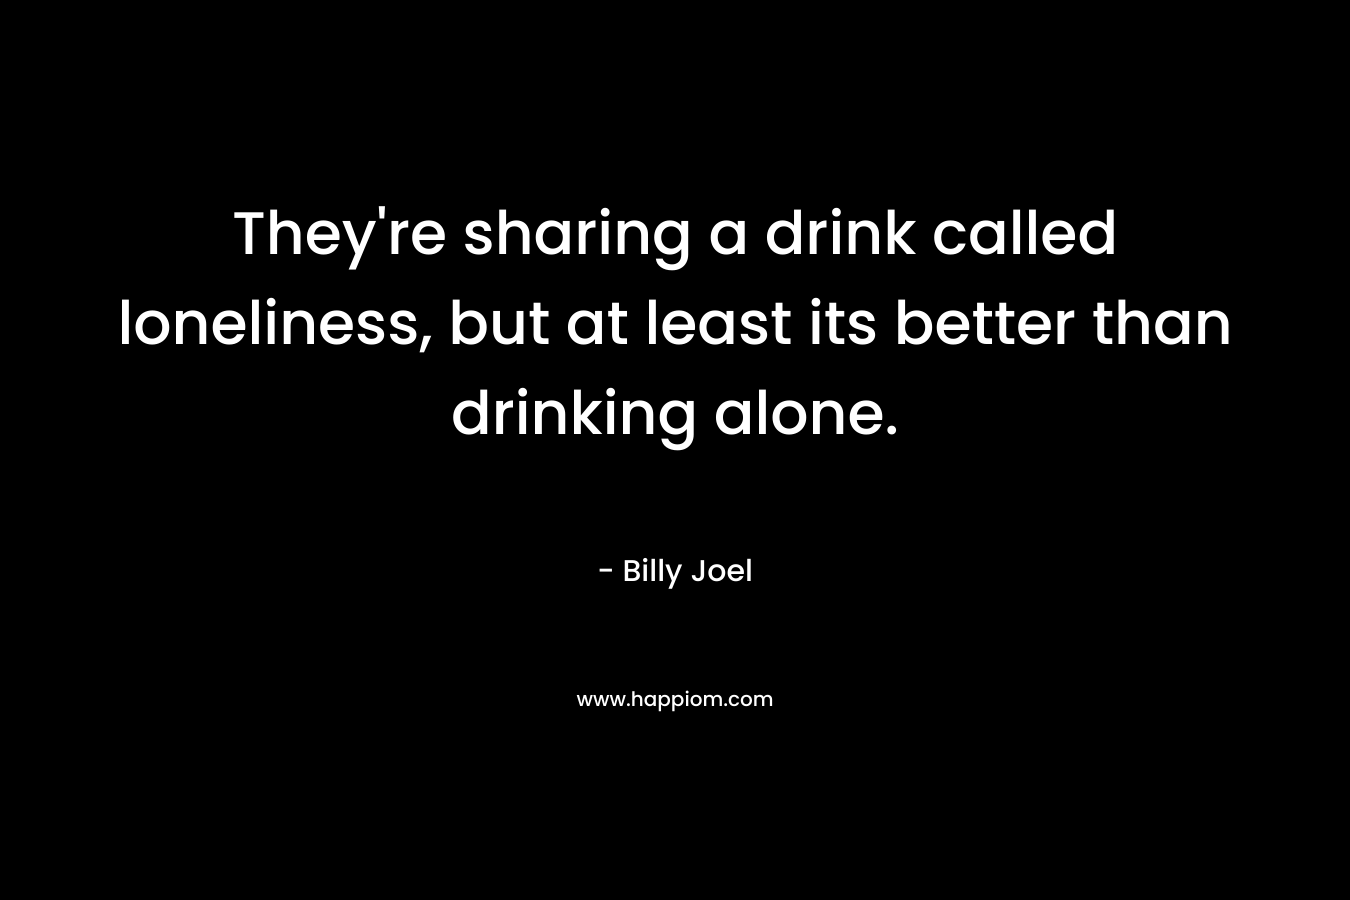 They’re sharing a drink called loneliness, but at least its better than drinking alone. – Billy Joel